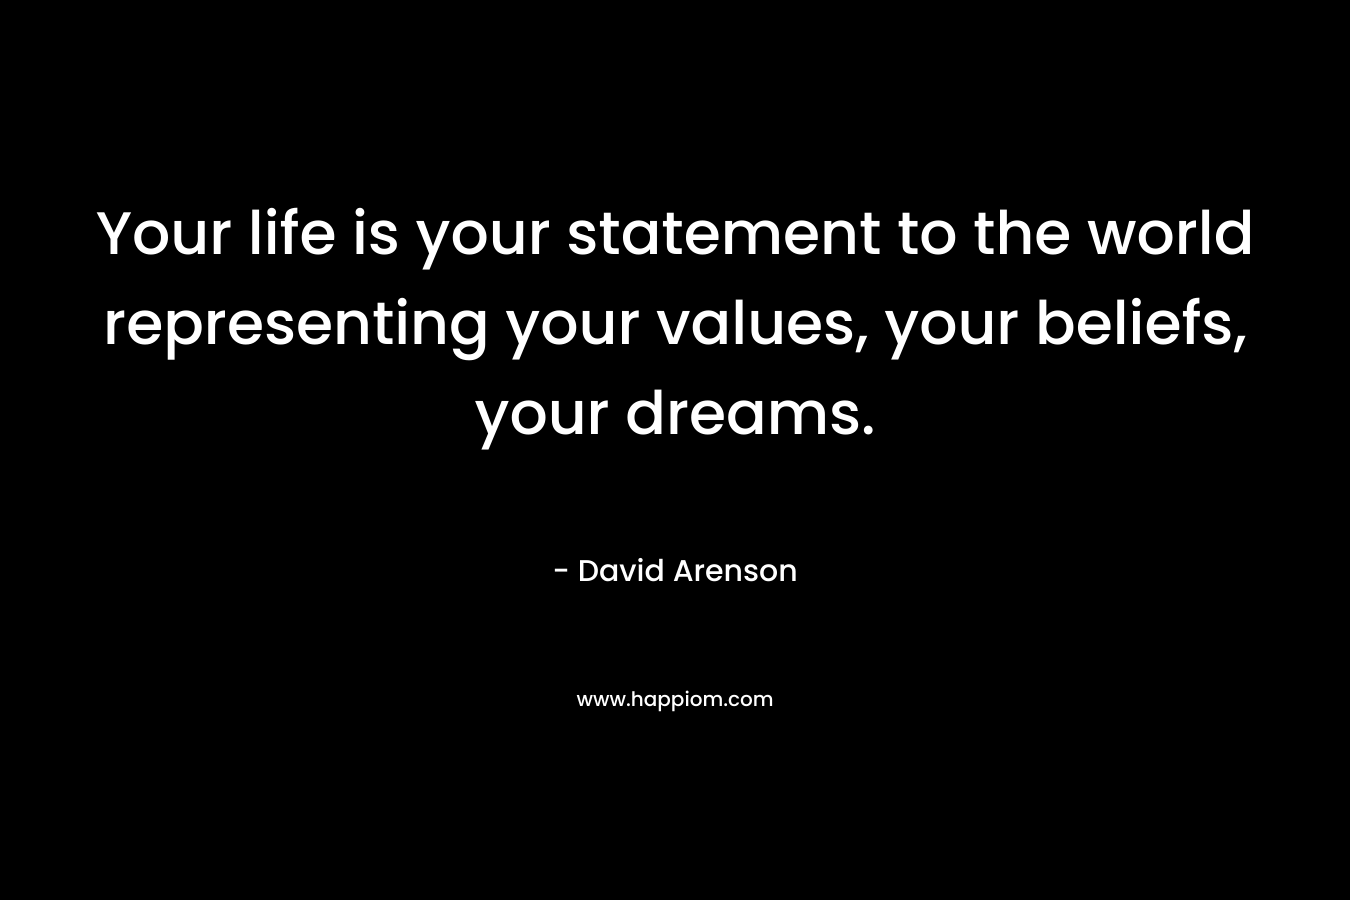 Your life is your statement to the world representing your values, your beliefs, your dreams. – David Arenson